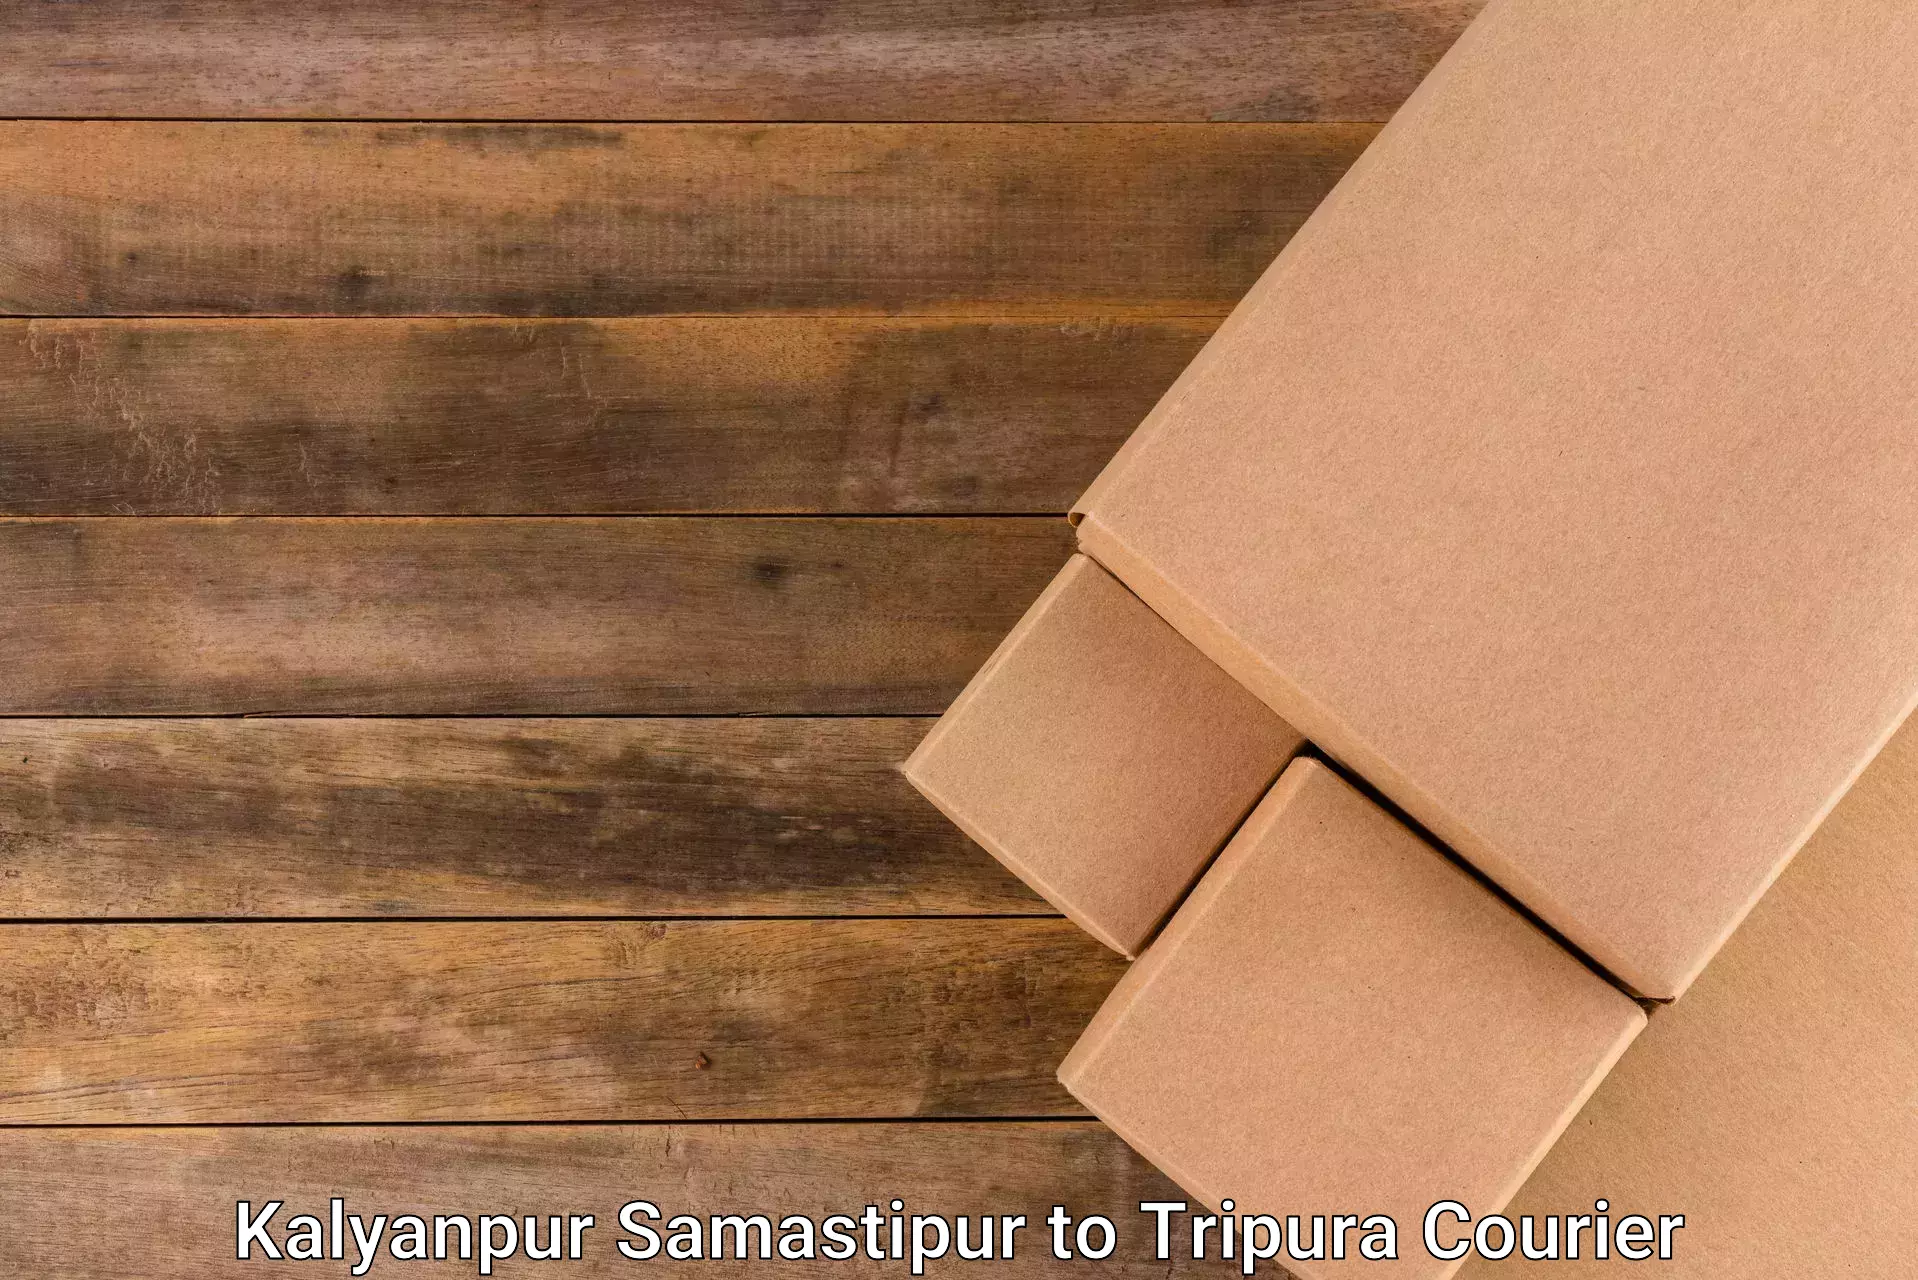 Cash on delivery service in Kalyanpur Samastipur to Dhalai